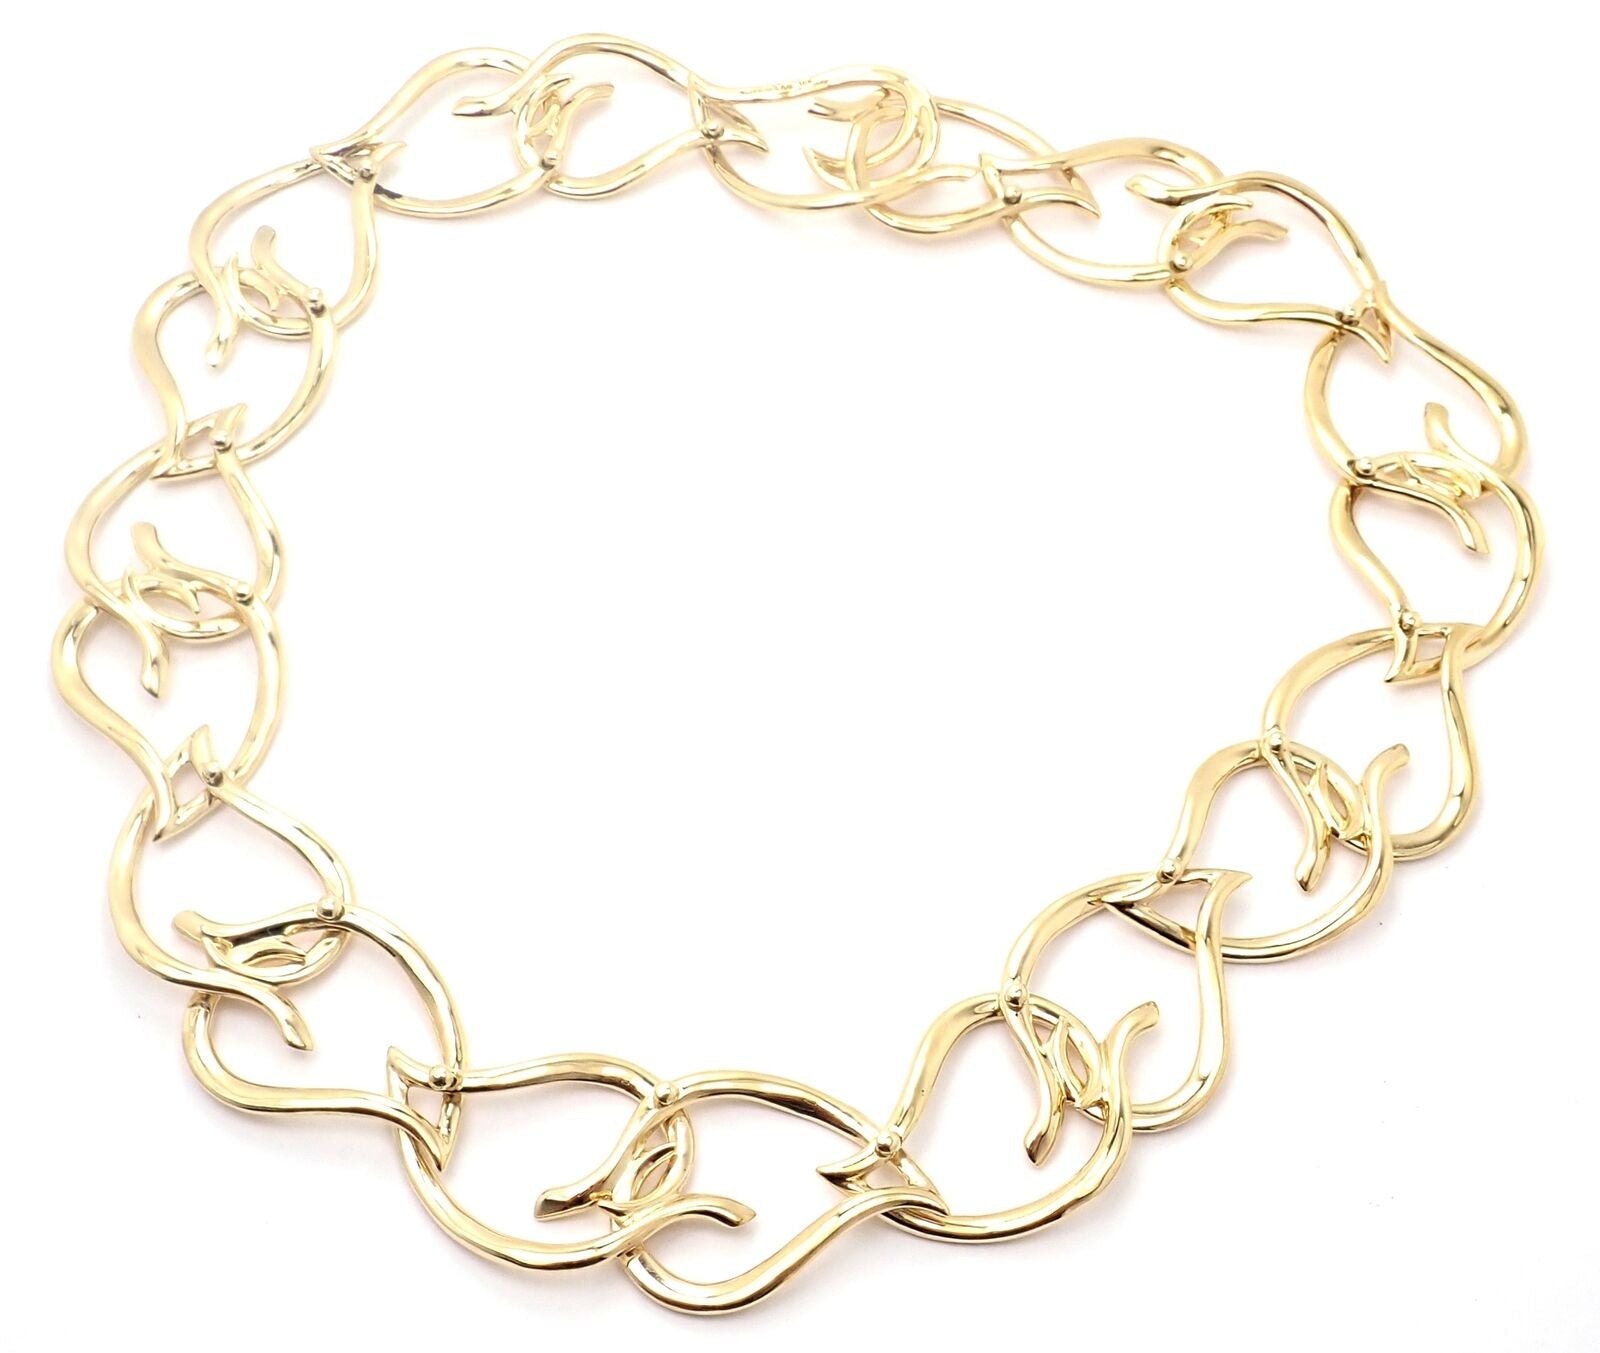 Estate Jewelry 18k Yellow Gold Wide Mesh Necklace - Estate Jewelry